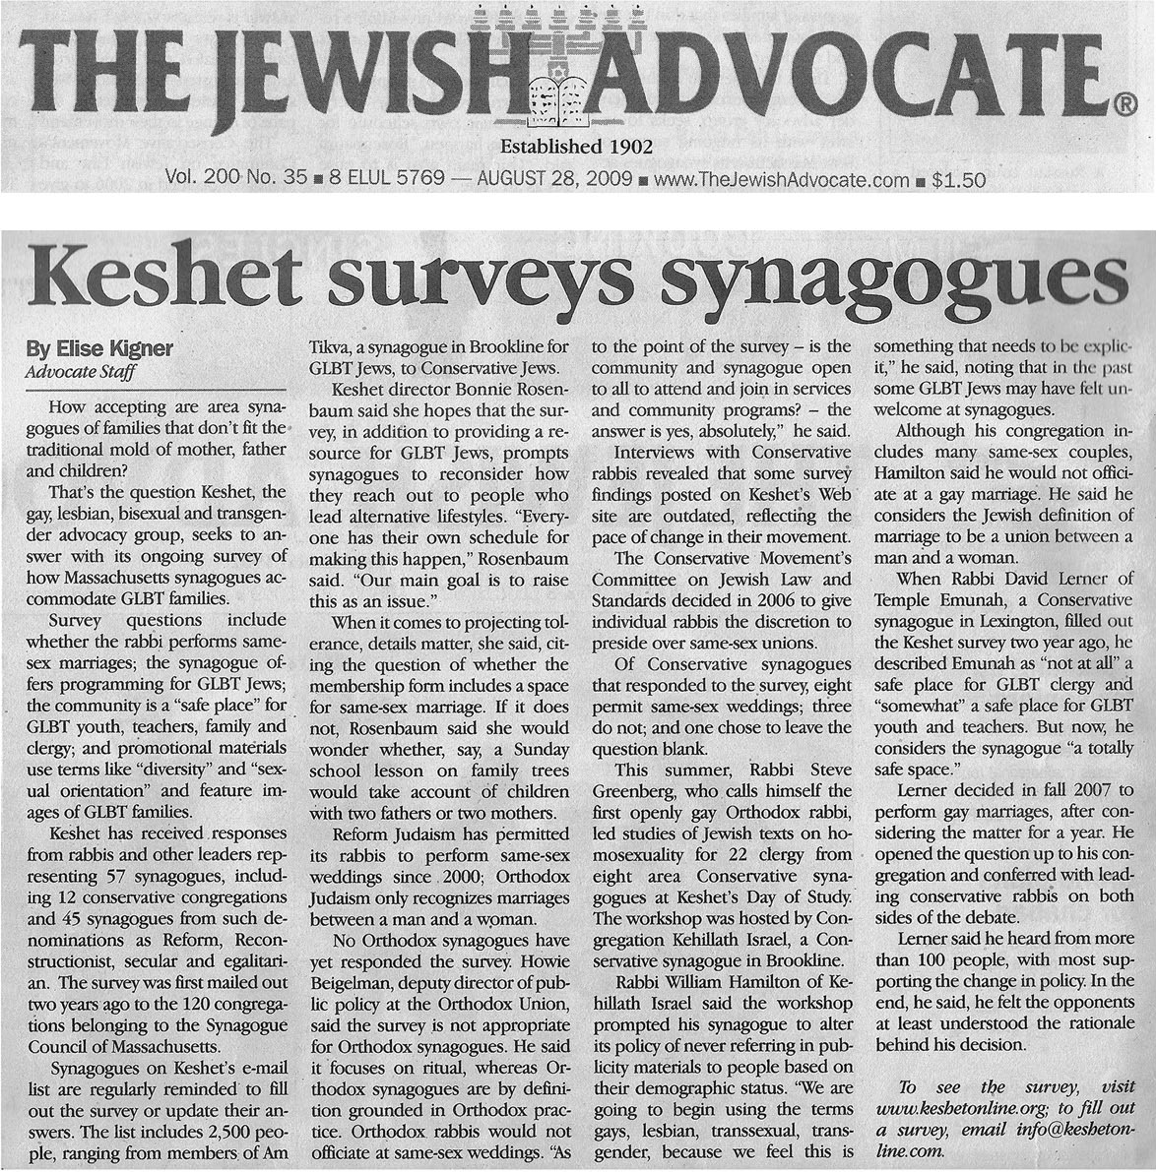 Image of a newspaper article with the title: "Keshet surveys synagogues"